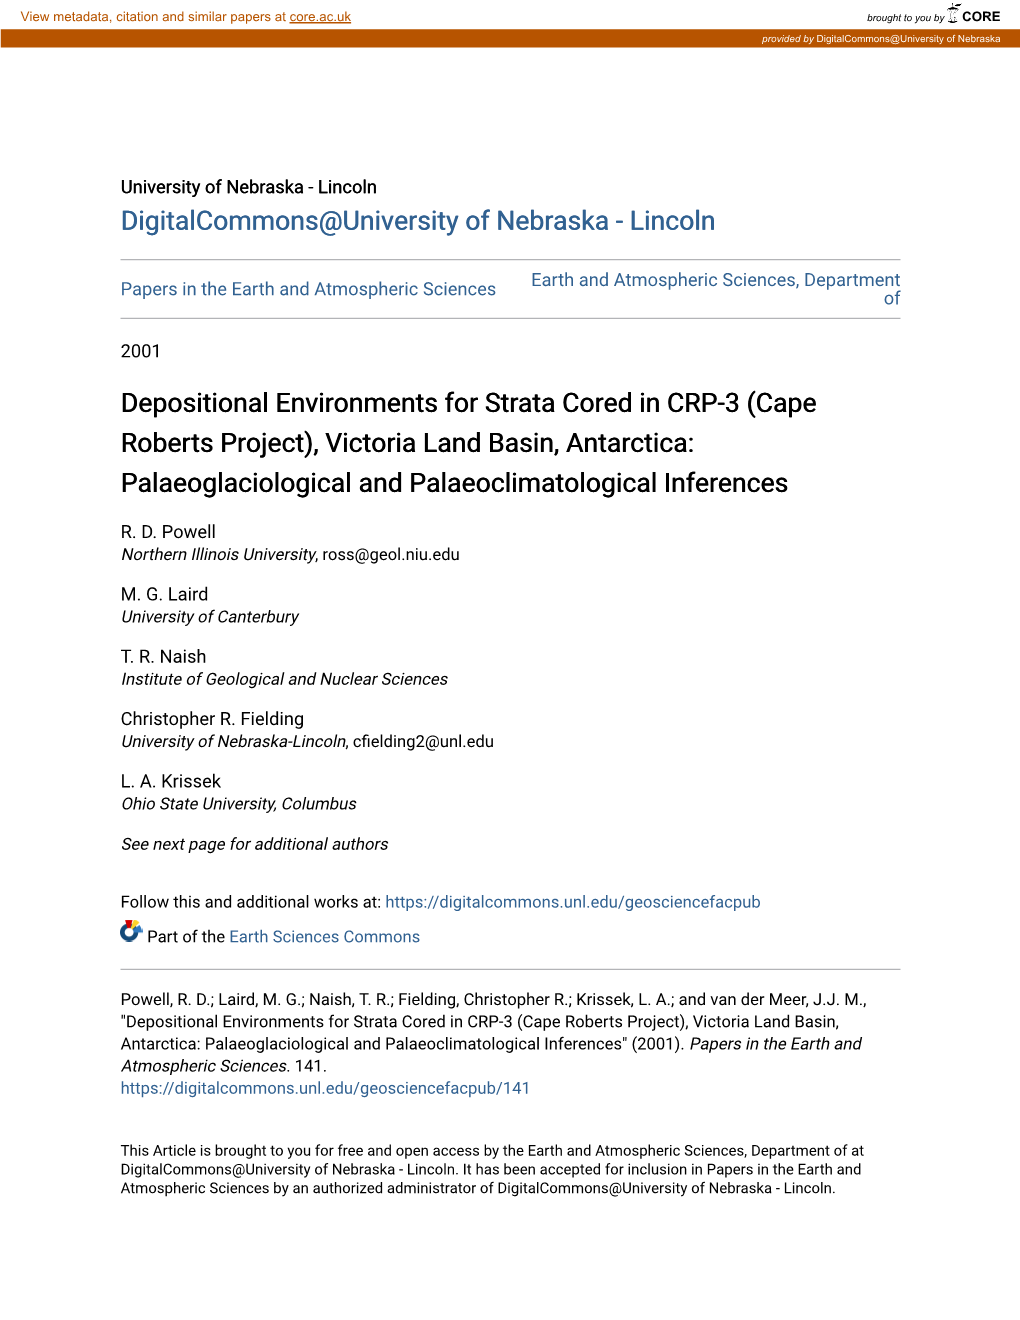 Depositional Environments for Strata Cored in CRP-3 (Cape Roberts Project), Victoria Land Basin, Antarctica: Palaeoglaciological and Palaeoclimatological Inferences